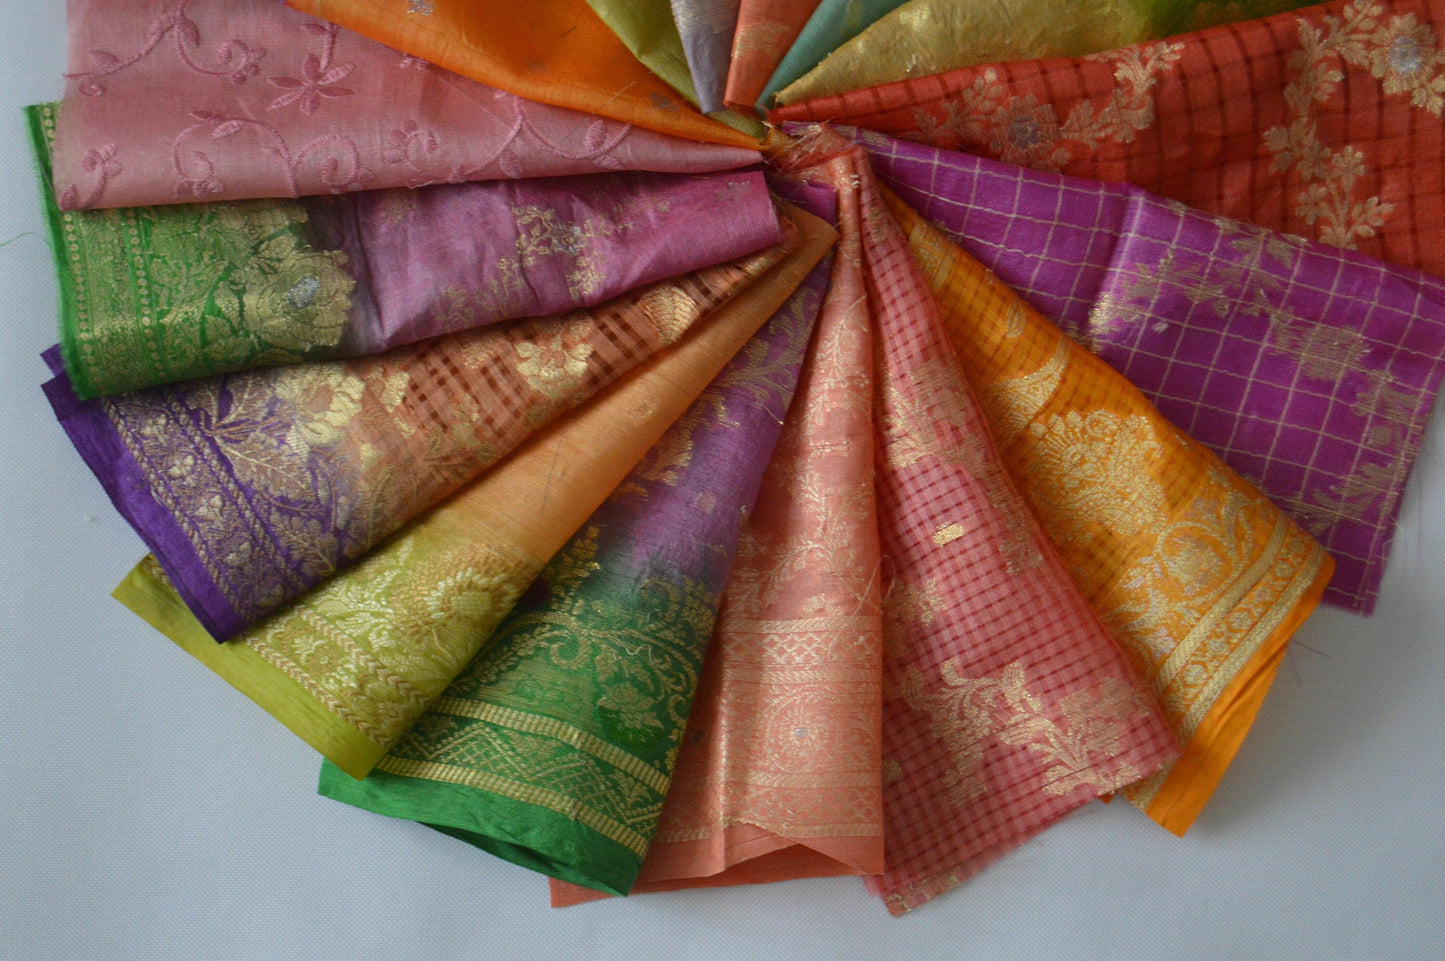 10 Inch x 16 Pieces Mixed Colour Recycled Vintage Sari Scraps Remnant Brocade Craft Fabric Collage Mixed Media Textile Art Junk Journals